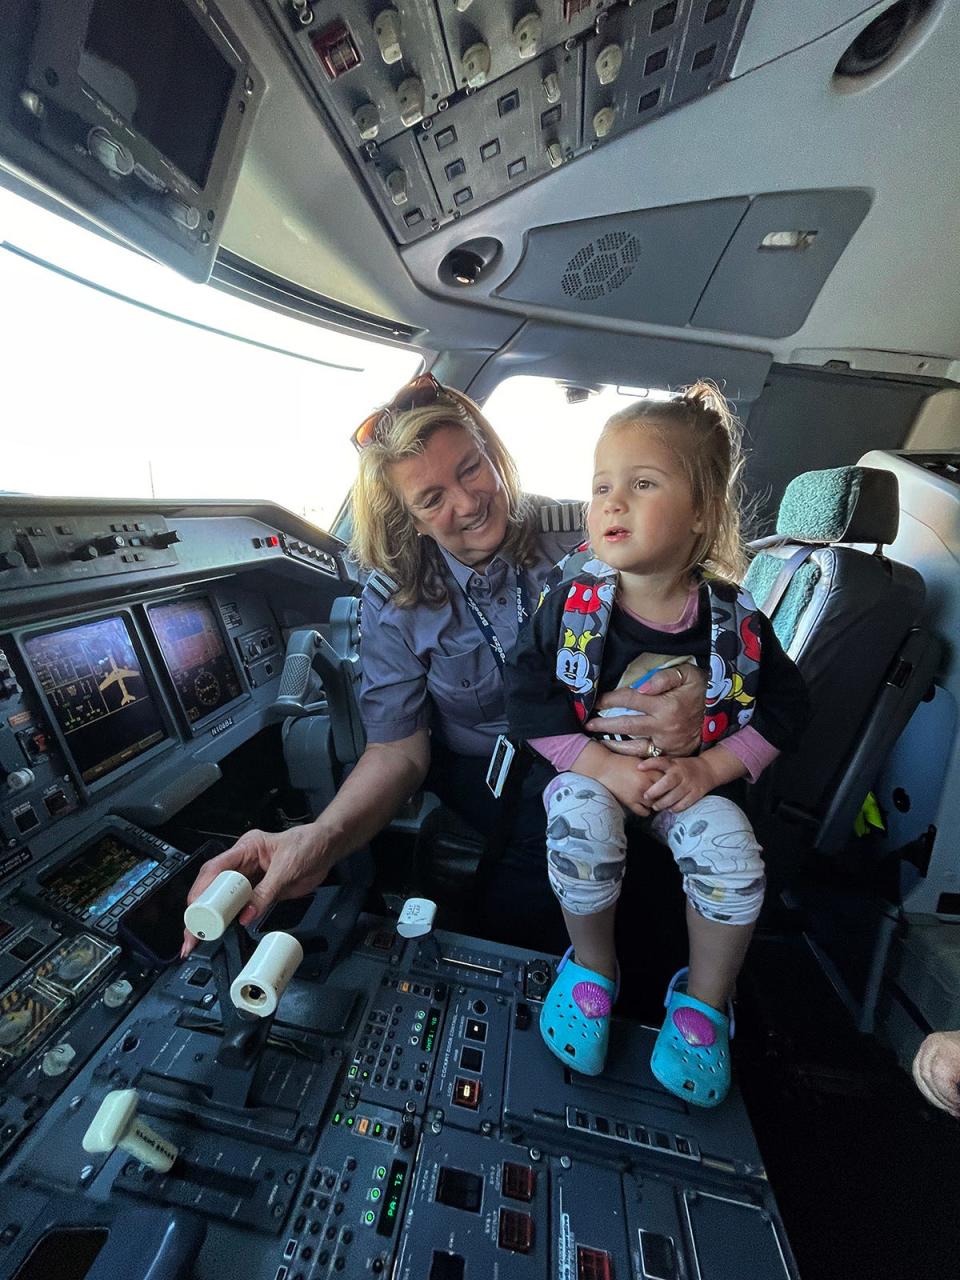 Assitant Chief Pilot, Margrit Fahan of Hartford, Conn. shows Kennedy Walker, 4, of Eagle Mountain, Utah, the cockpit during a mock trip. Fahan has been flying since 1975. Breeze Airways hosted an exercise for people with autism, ages 3-20, to experience the process of airplane procedures to make future travel easier.